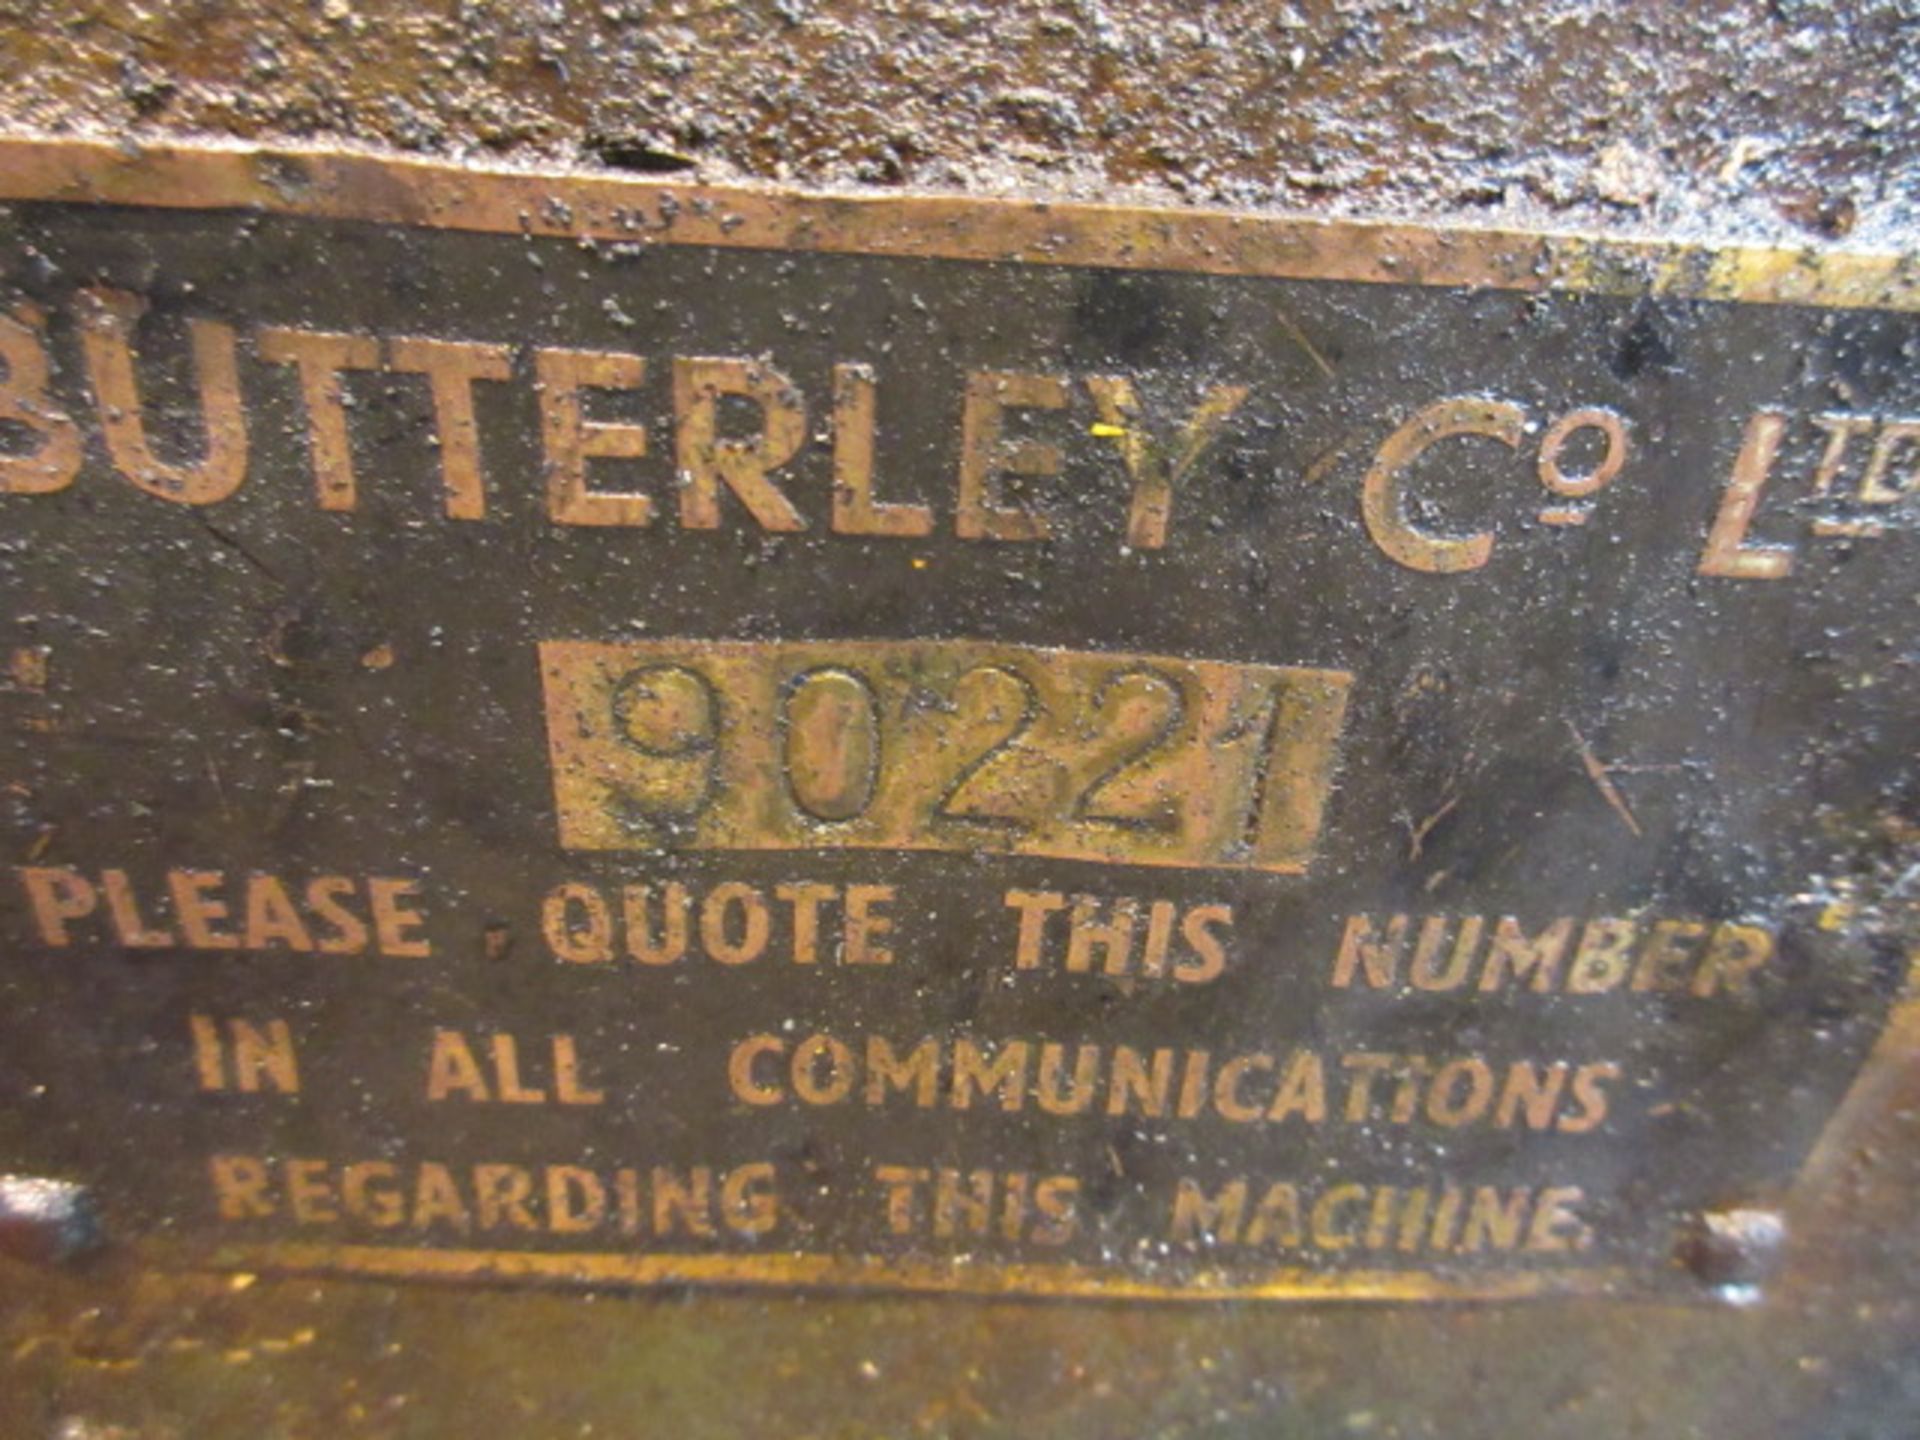 Butterley 75t inclinable geared power press - Image 6 of 6